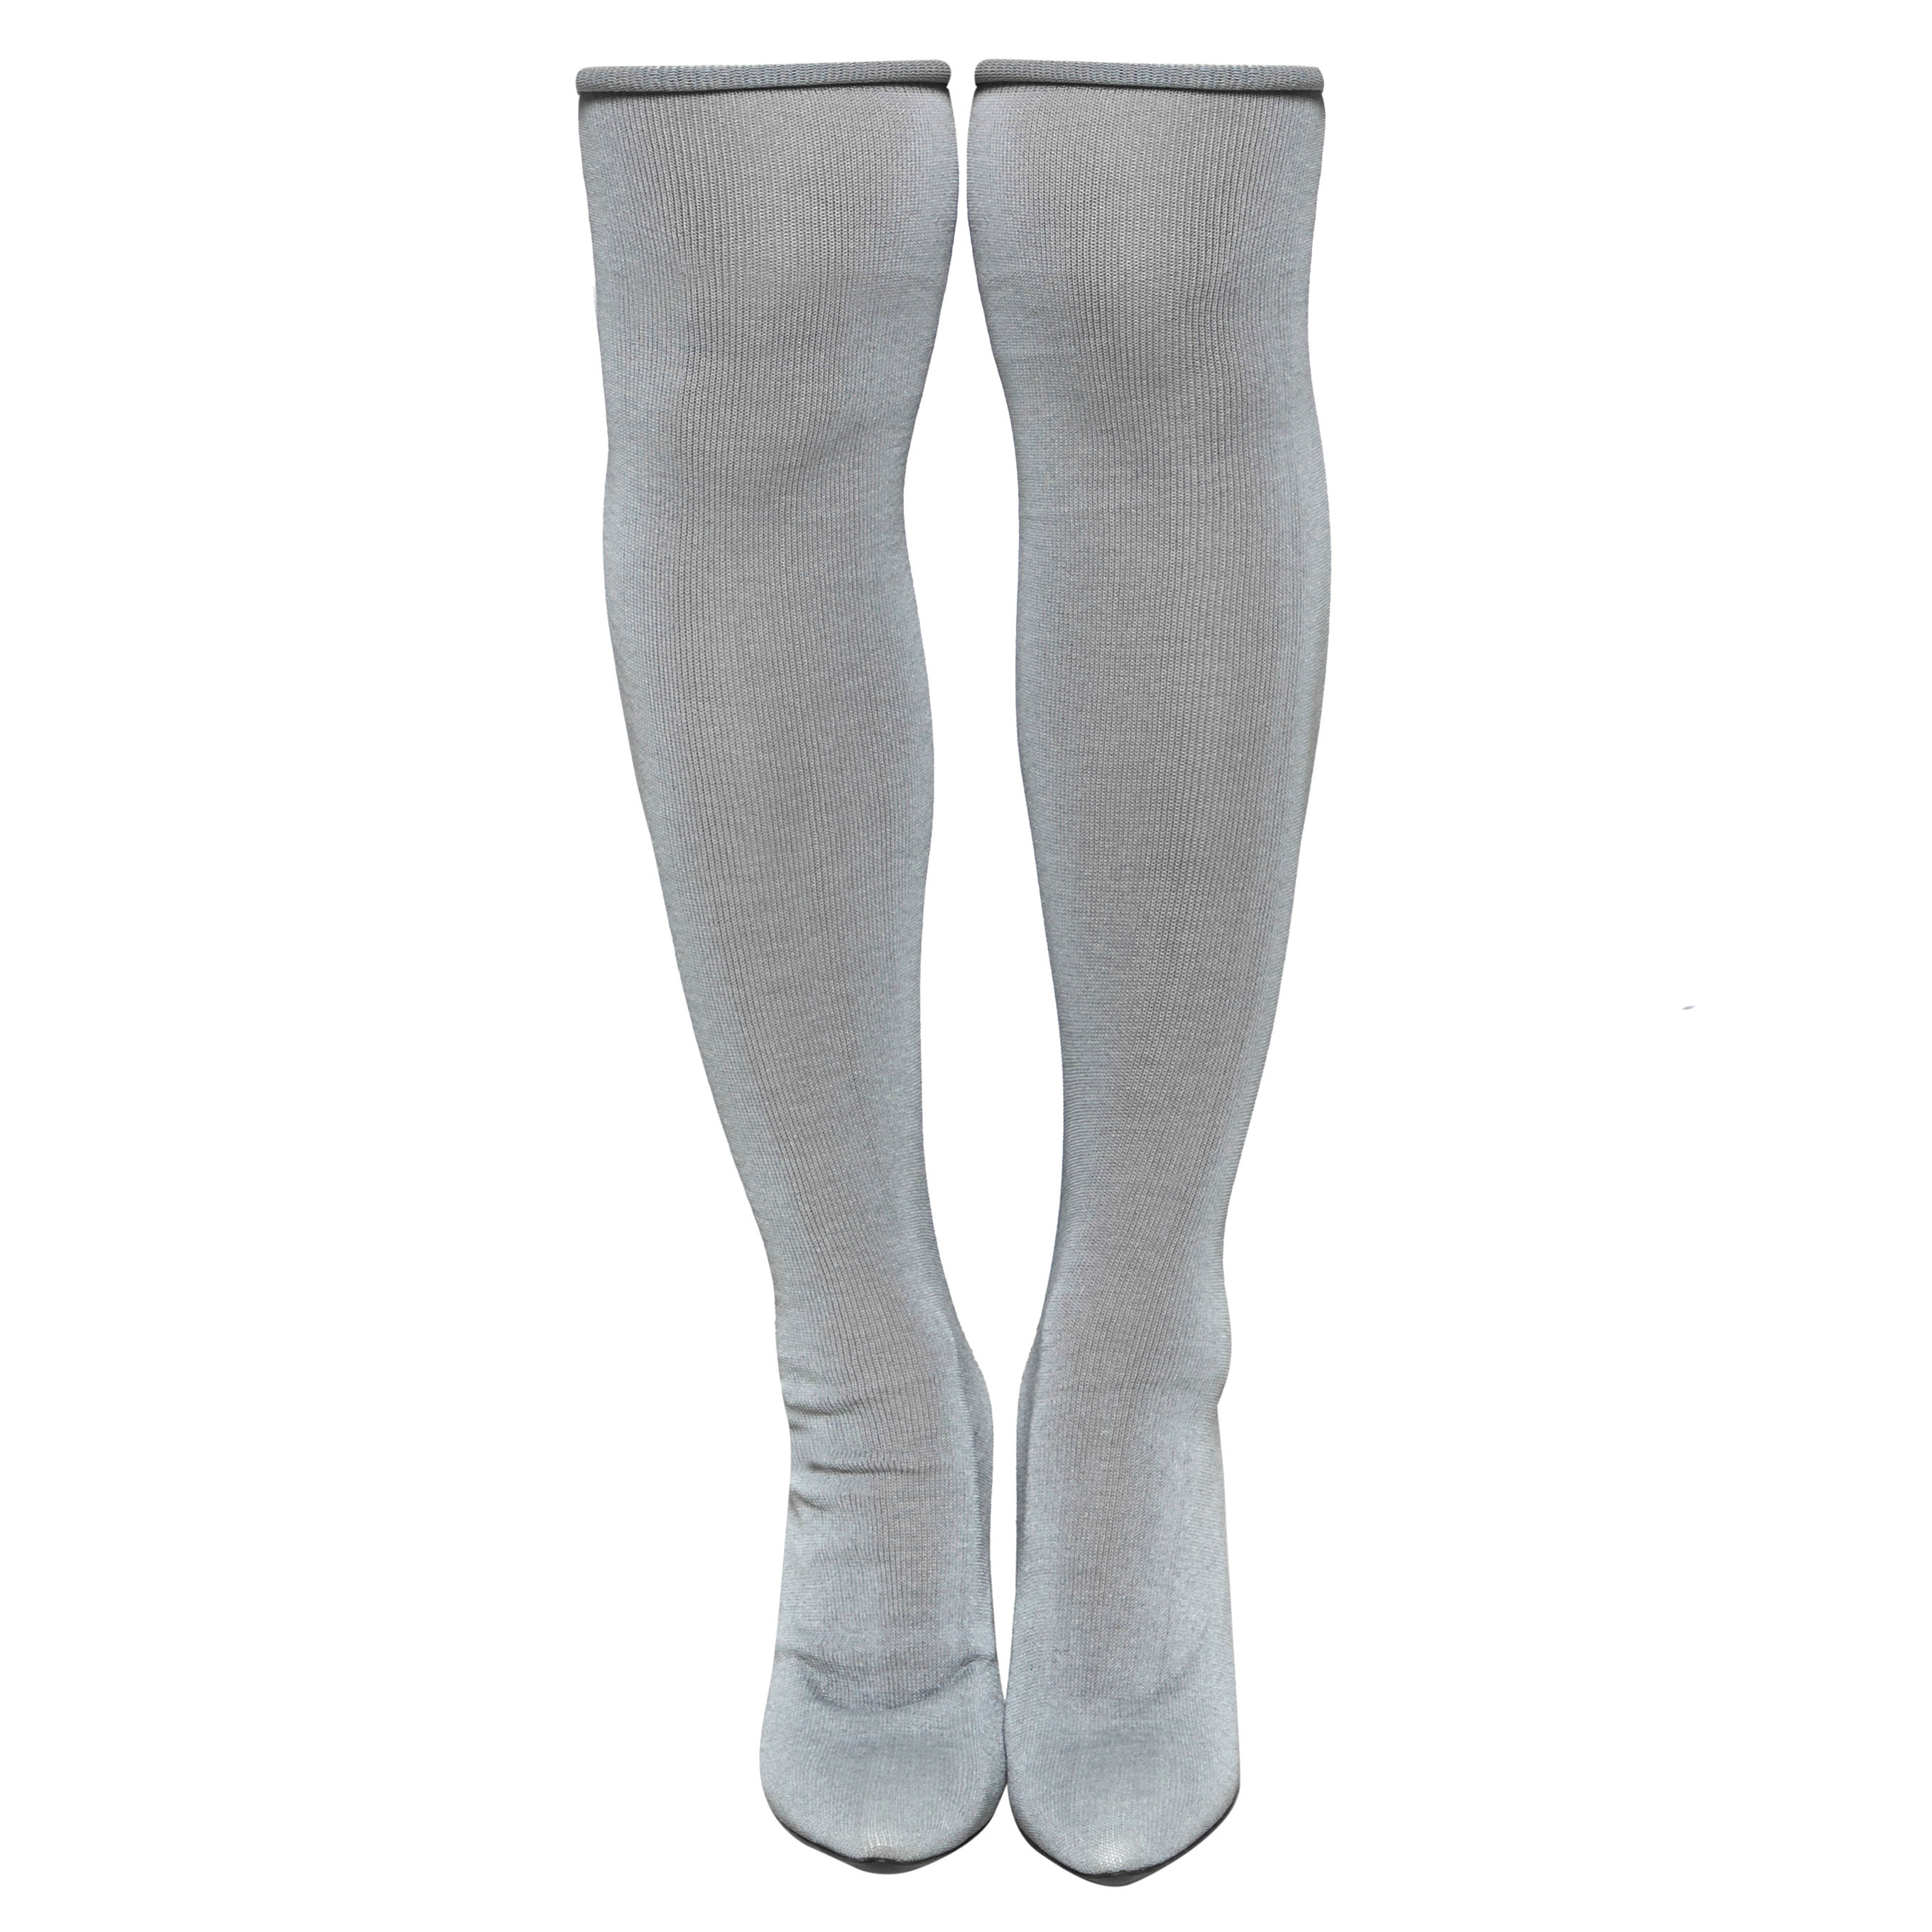 Vetements Grey Stretch Fabric Knee High Boots Size 37